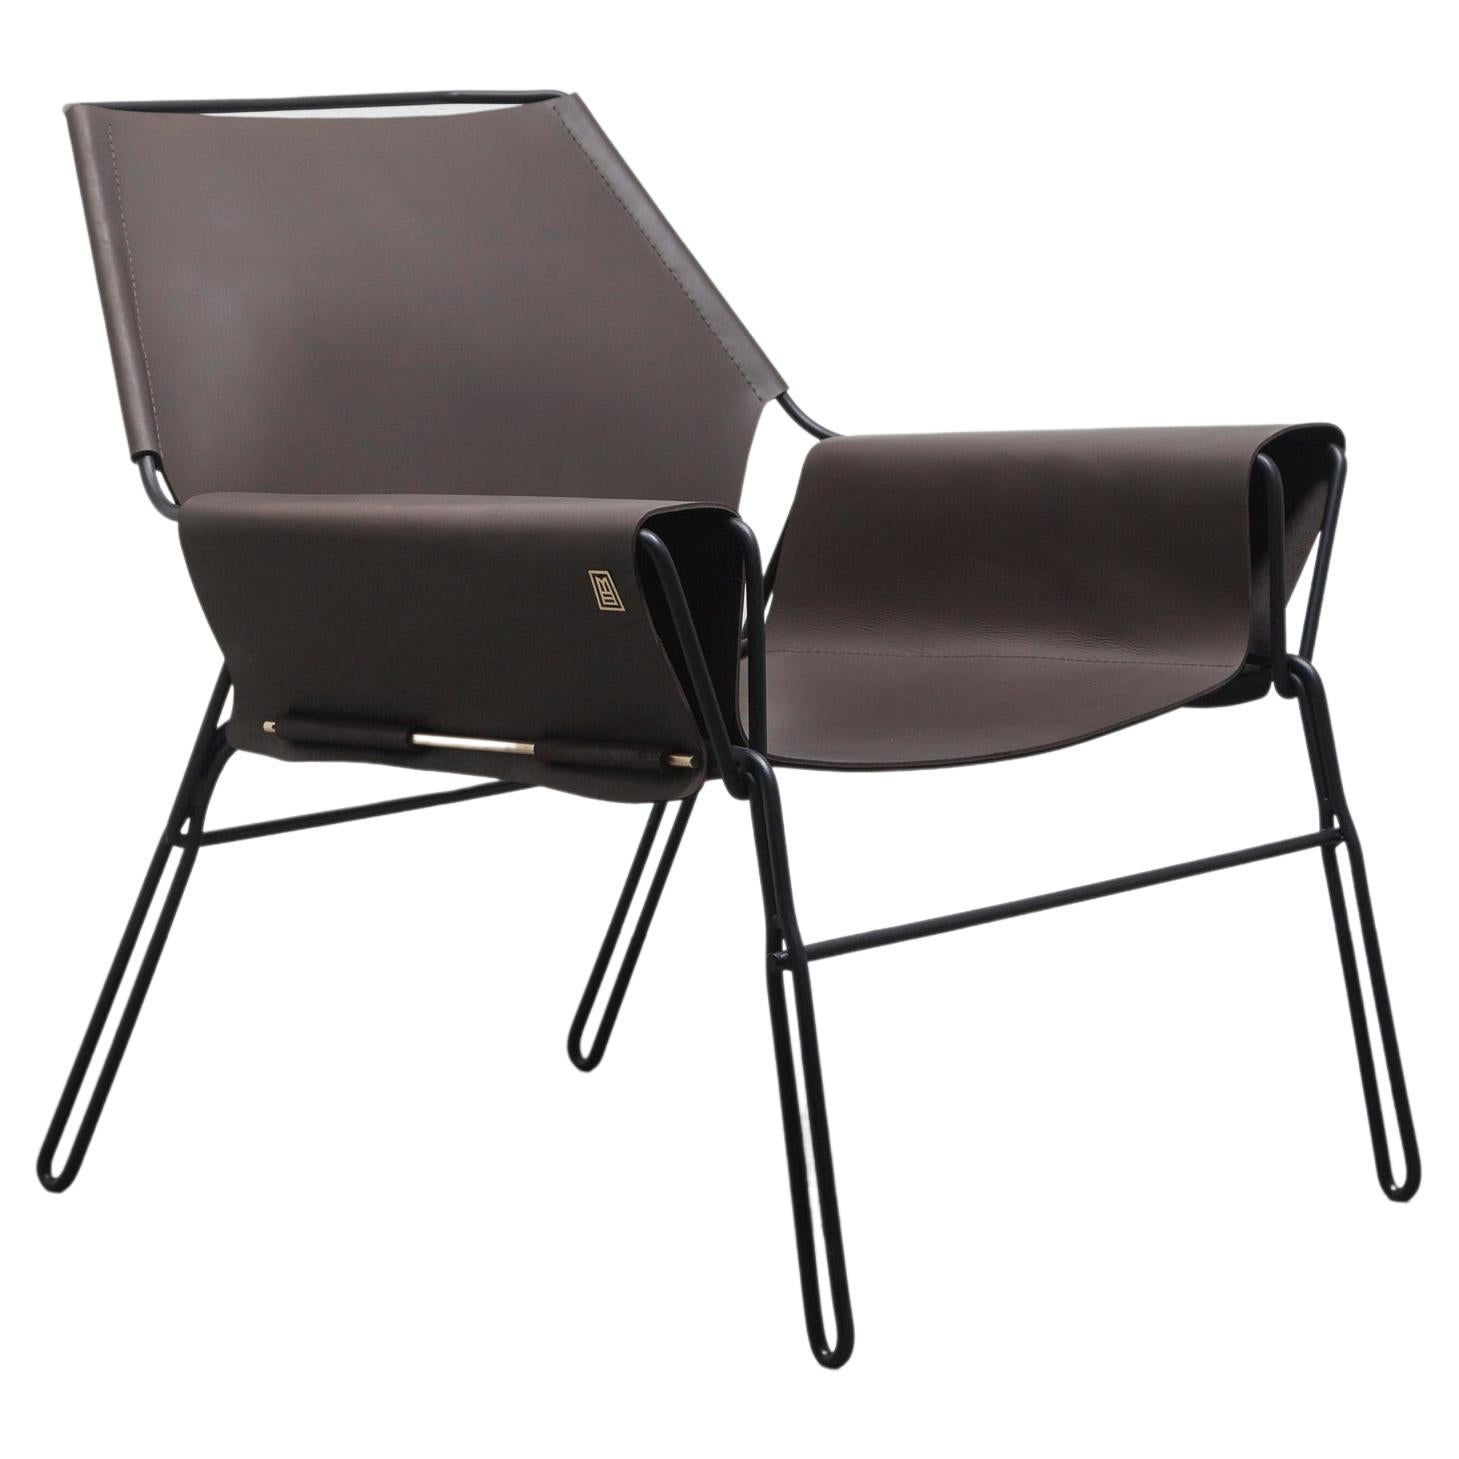 Perfidia_02 Lounge Chair Brown by ANDEAN, Represented by Tuleste Factory